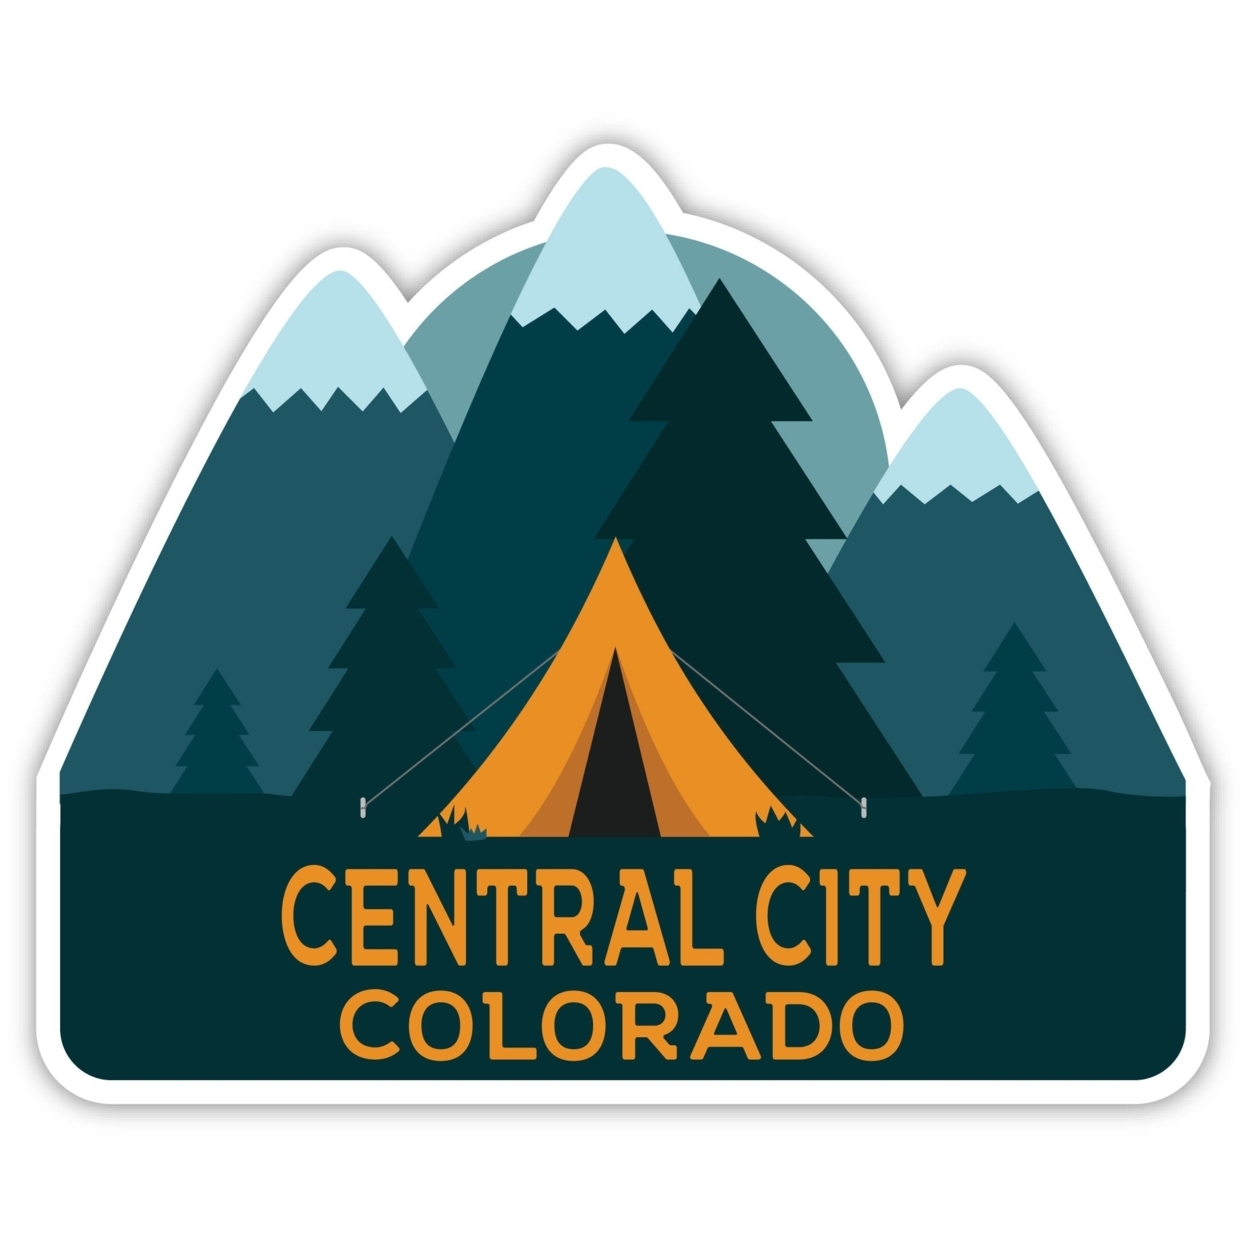 Central City Colorado Souvenir Decorative Stickers (Choose Theme And Size) - 4-Pack, 2-Inch, Bear